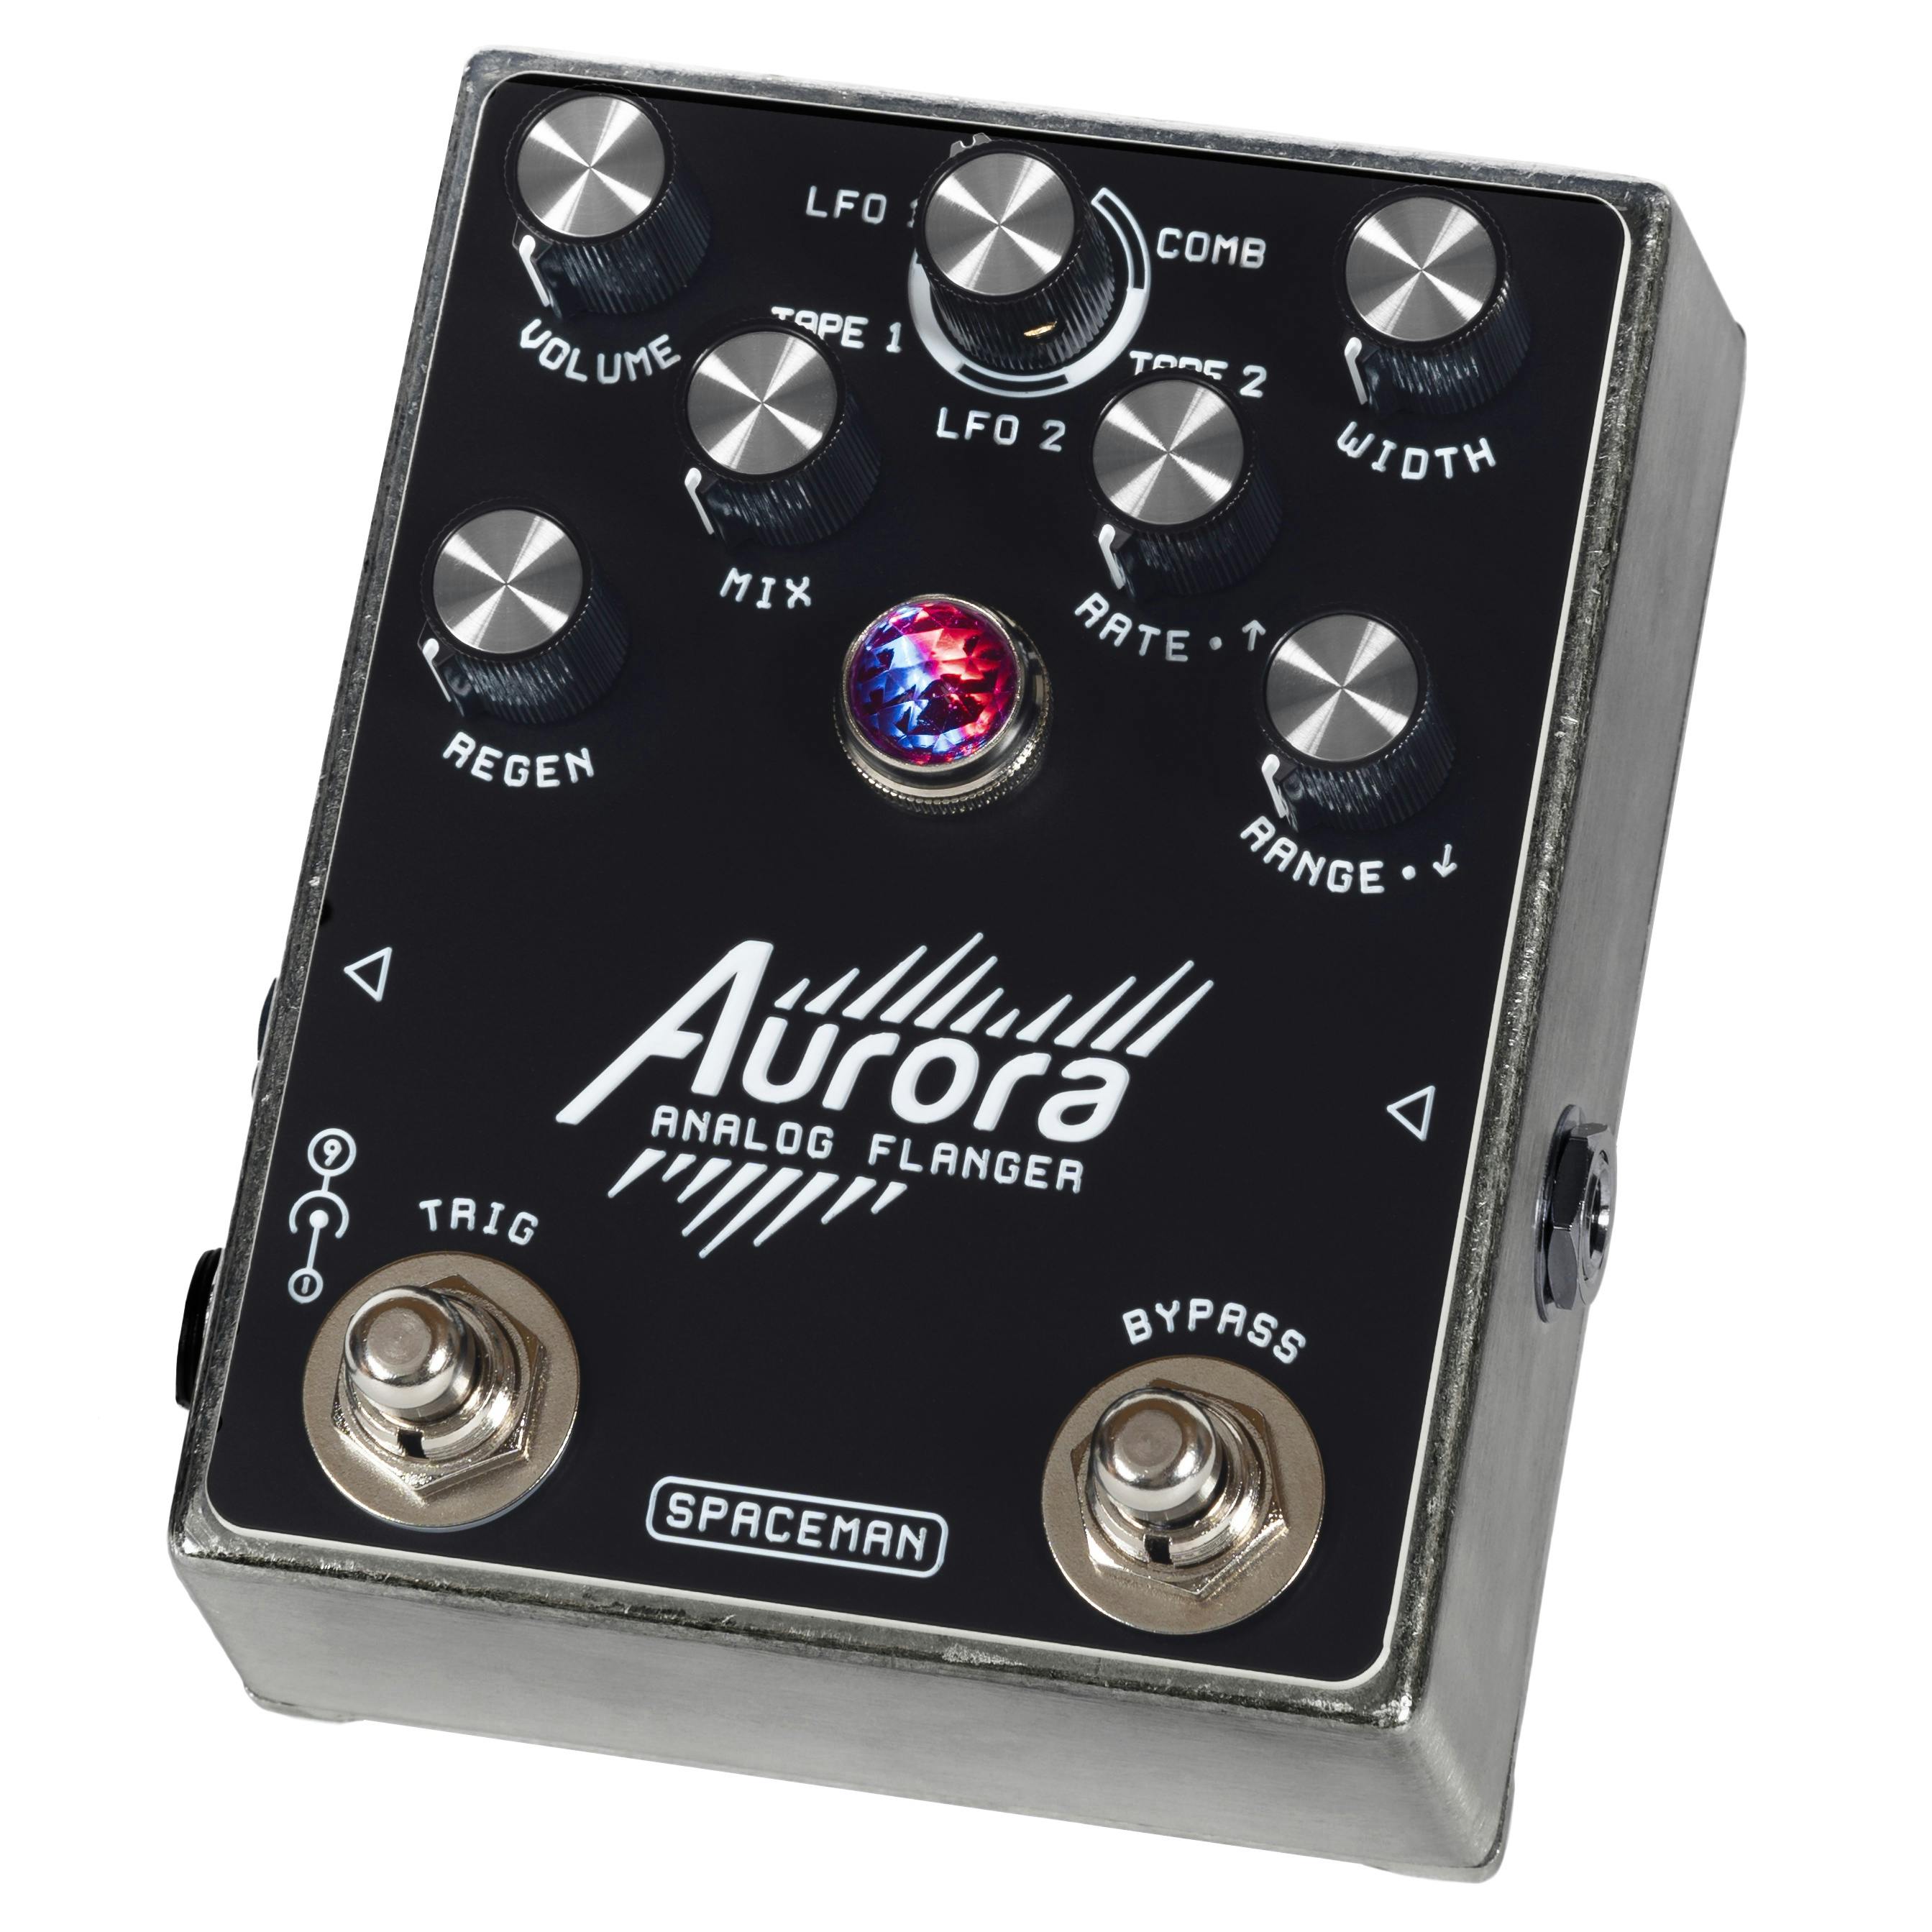 Spaceman Effects Aurora Analog Flanger Pedal in Silver